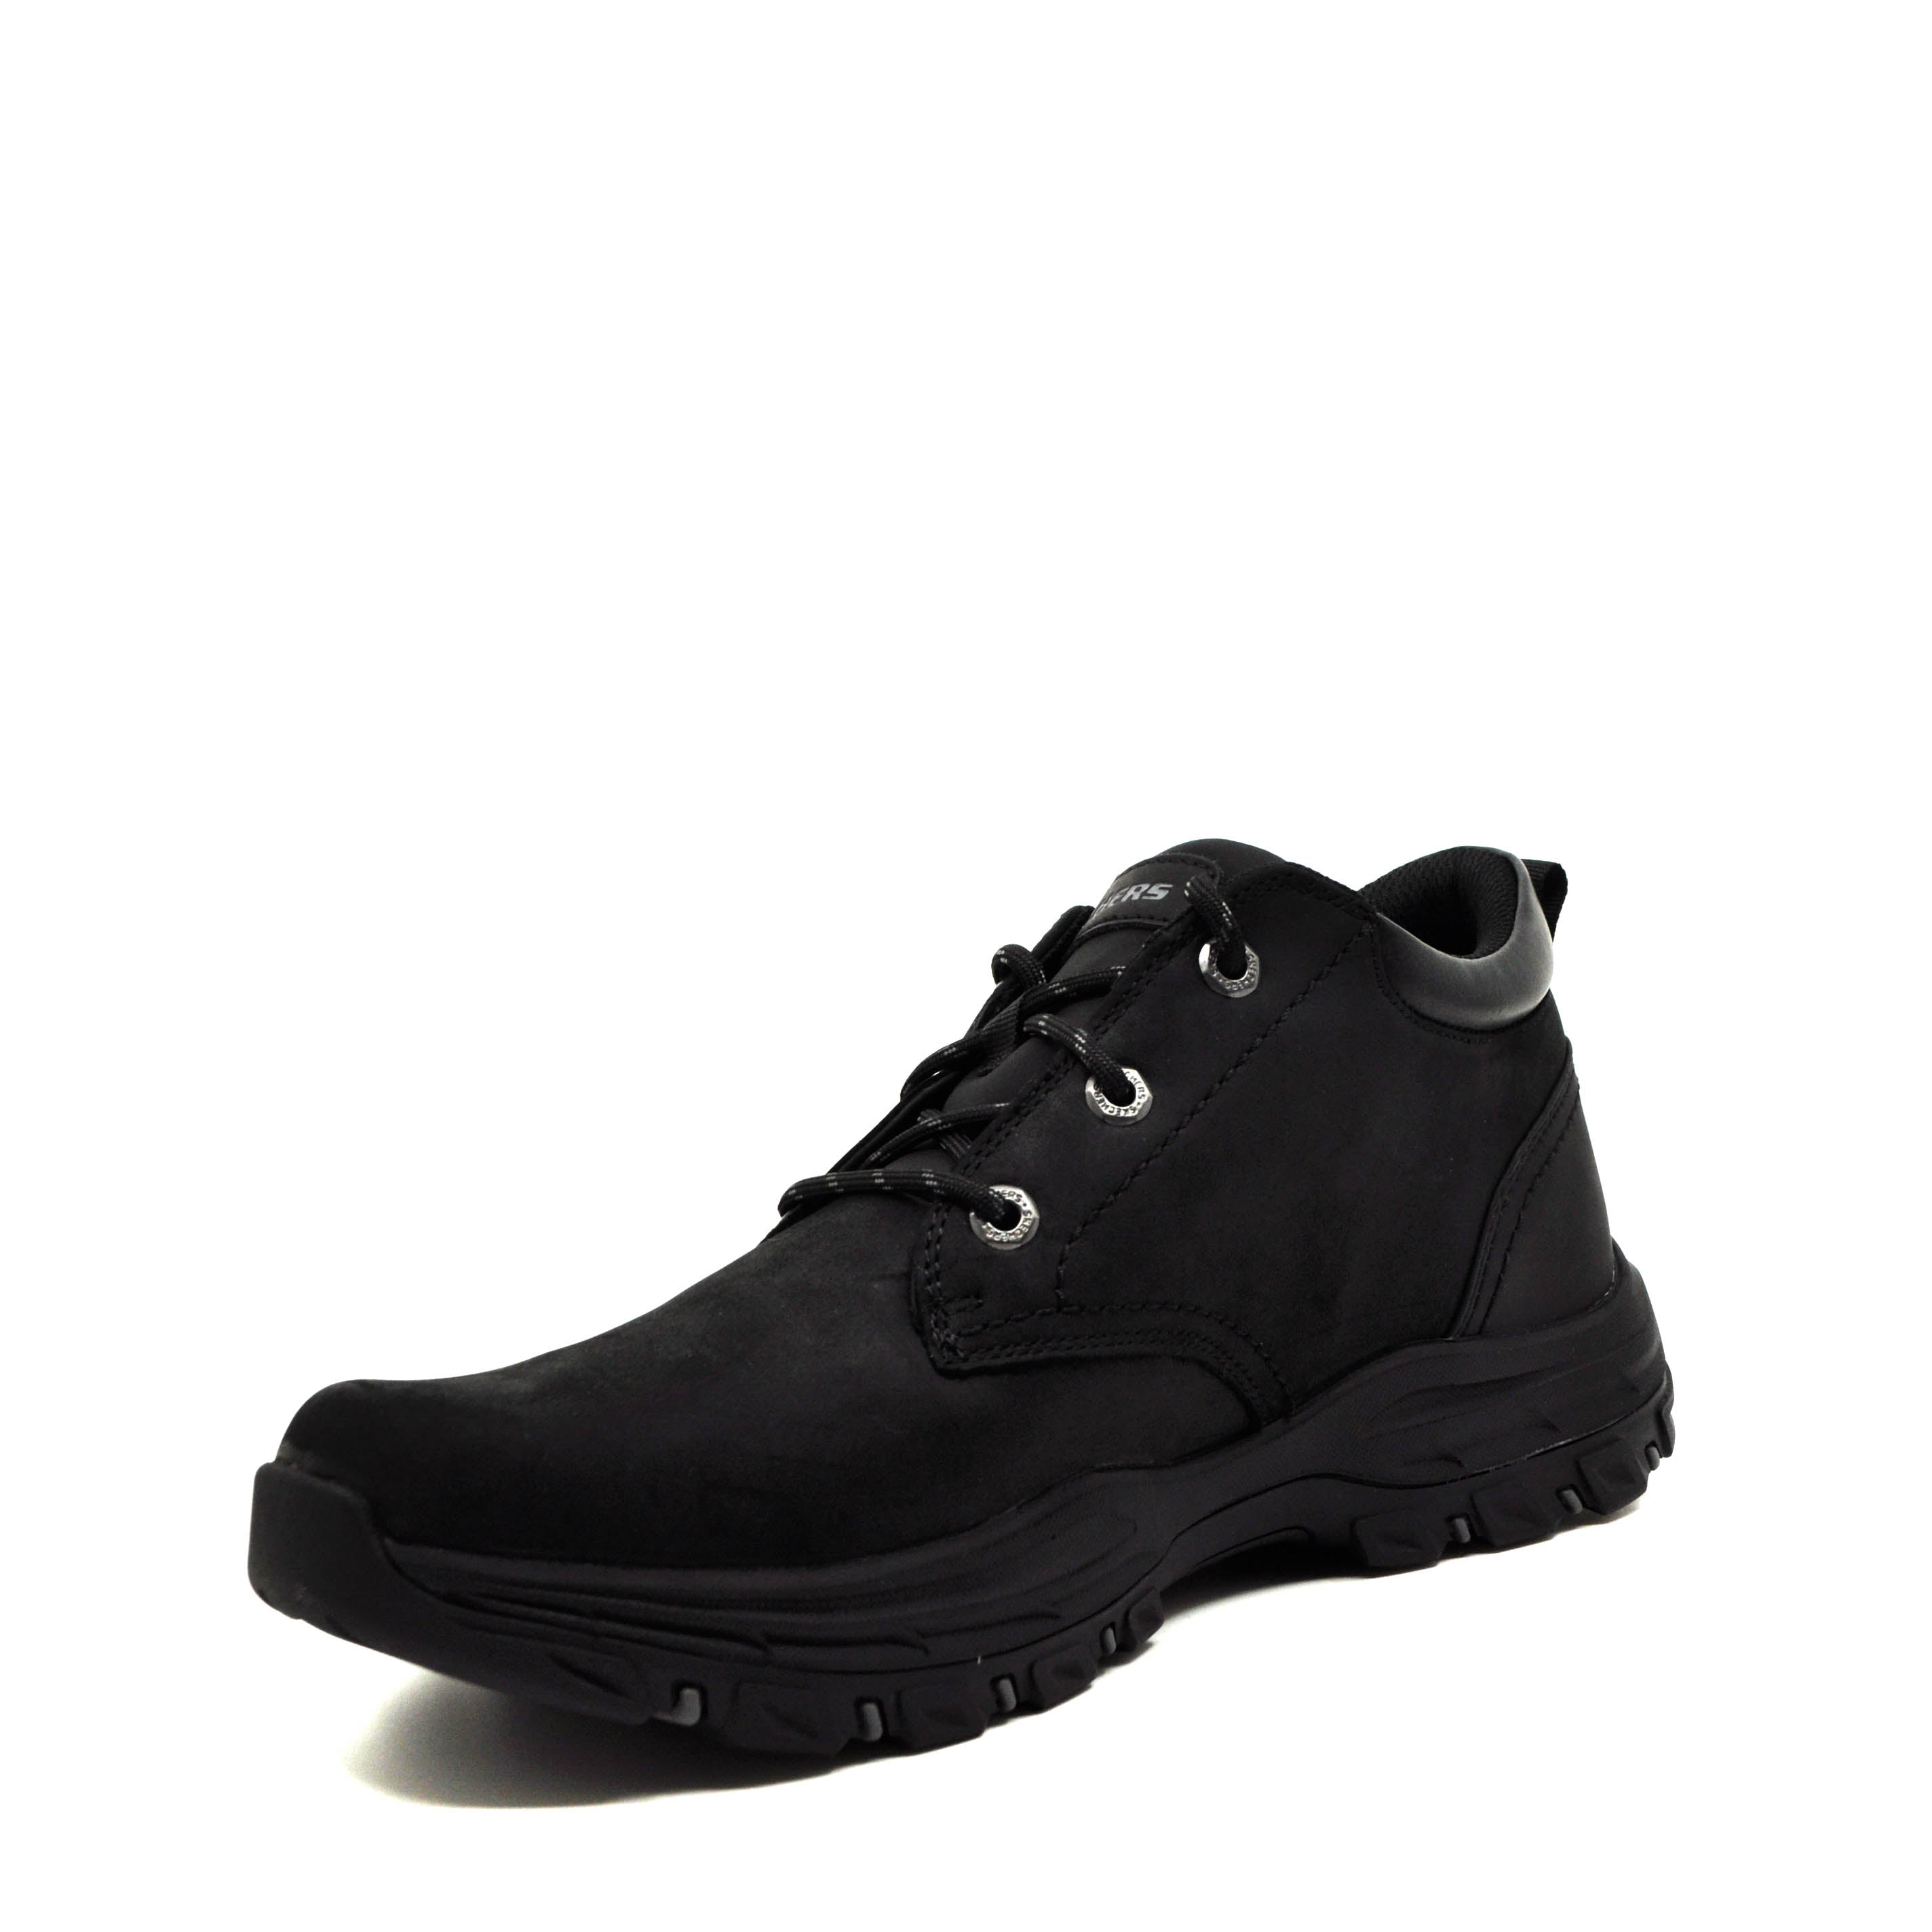 black casual shoes for men